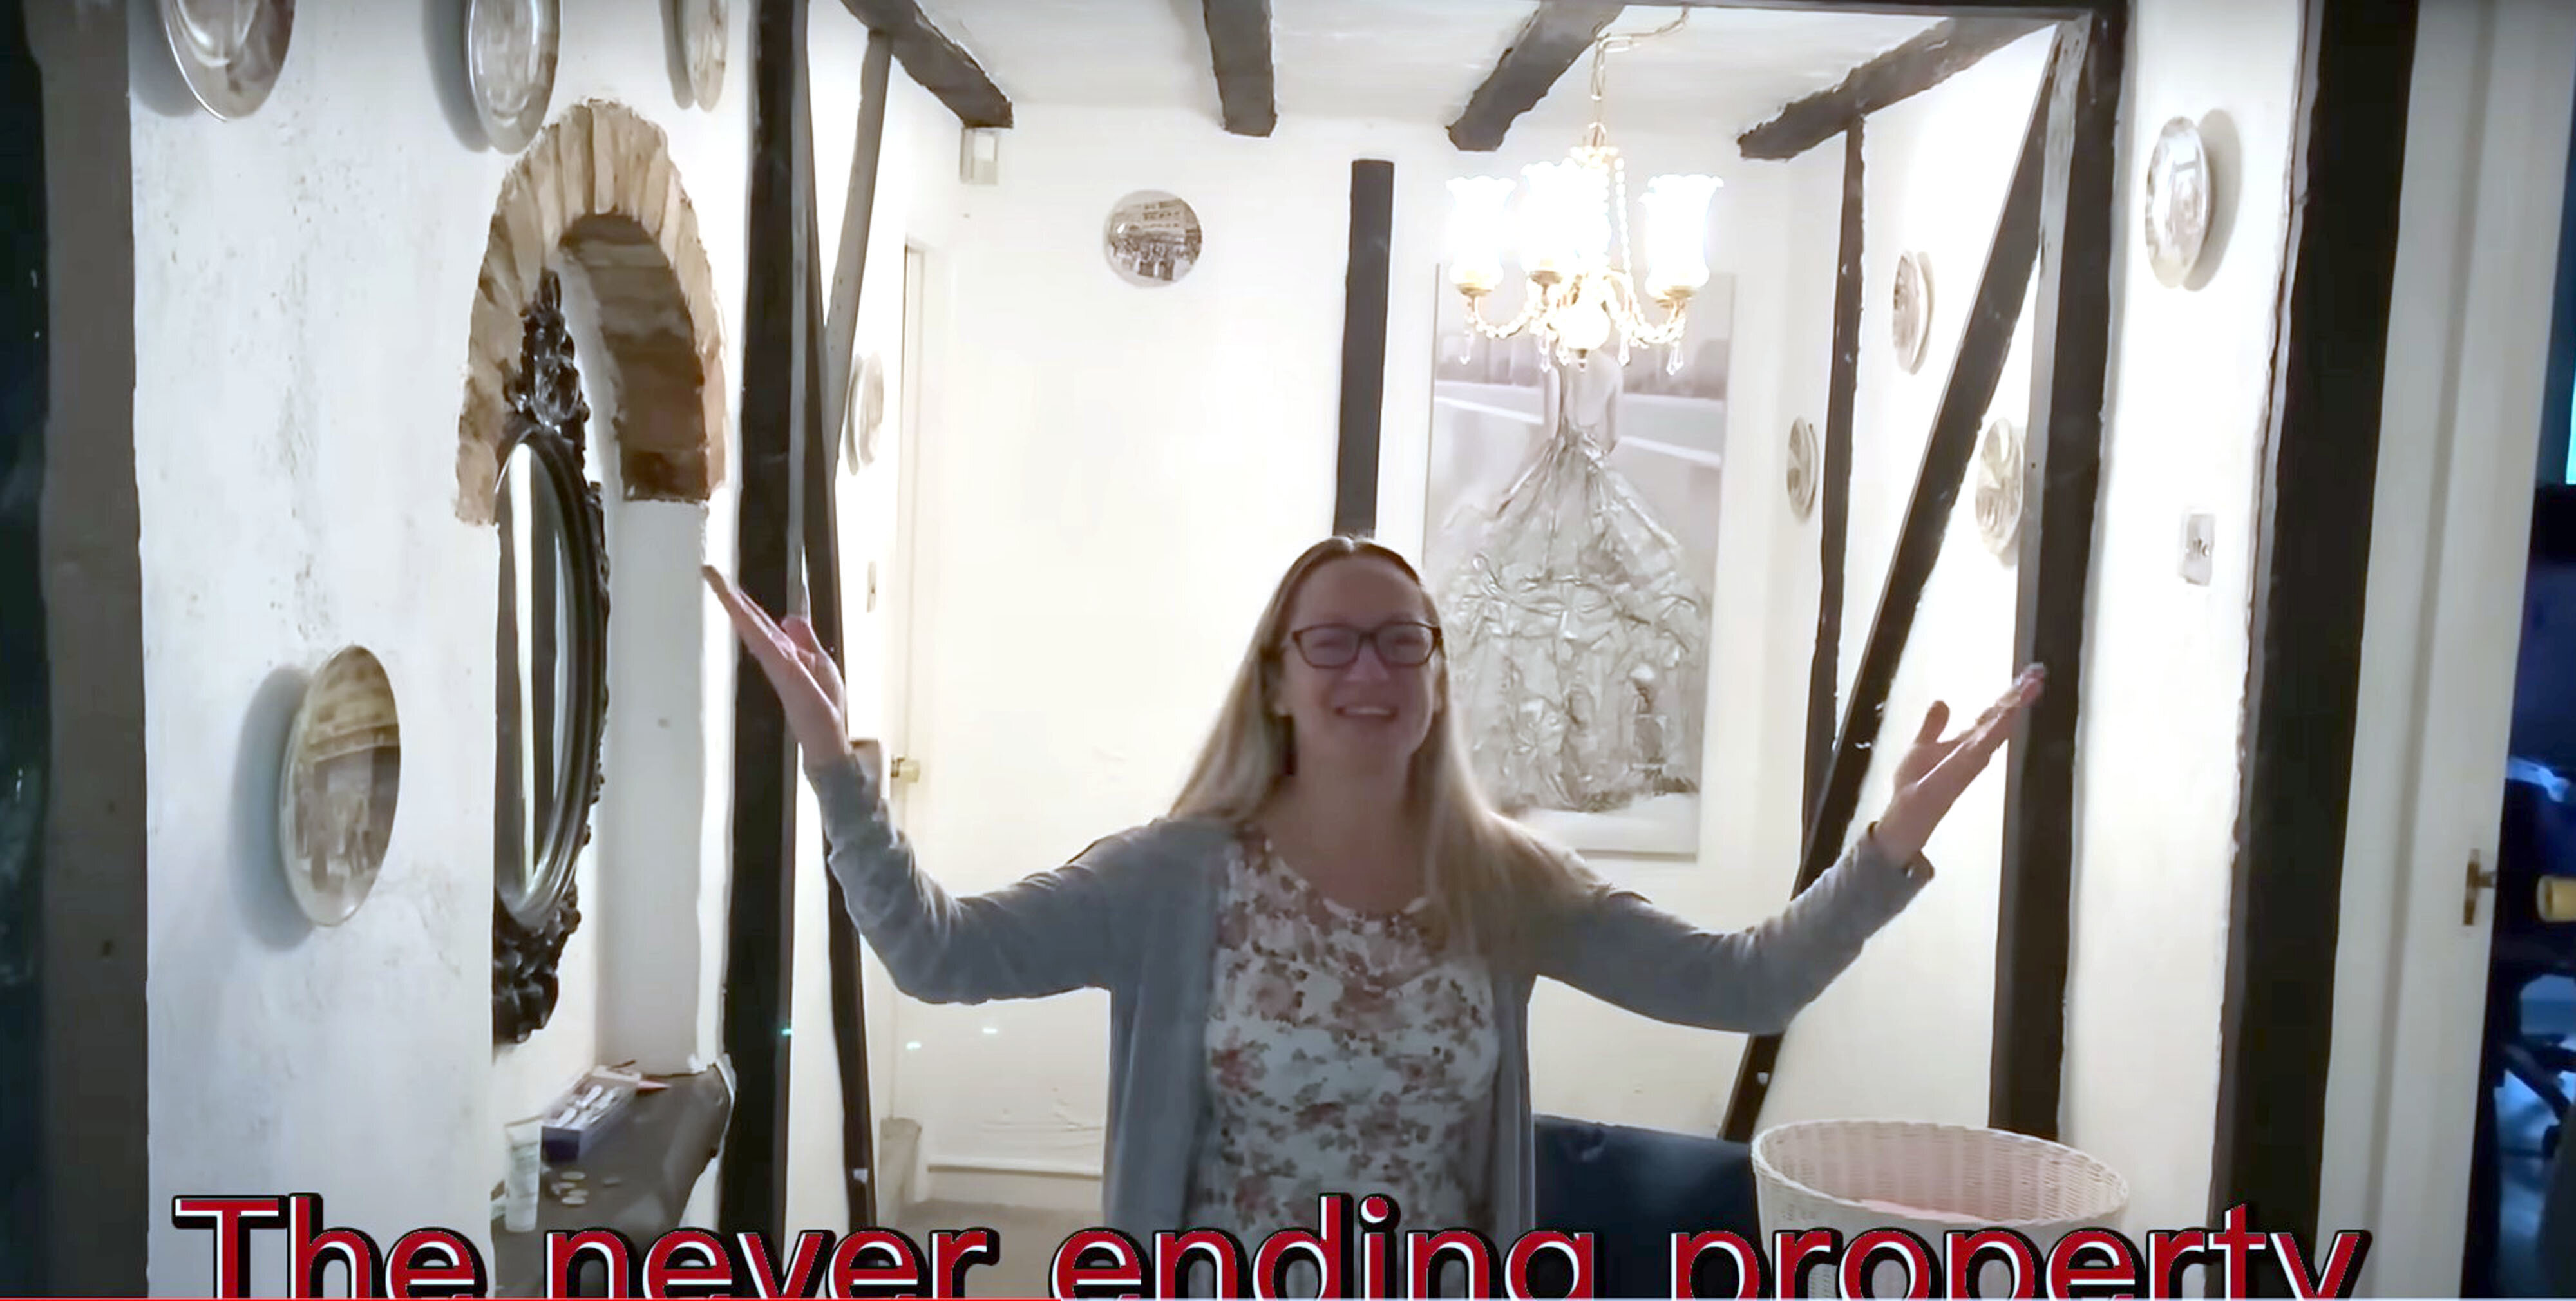 Singing Estate Agents Video For Five-Bedroom House In Leighton Buzzard Goes Viral